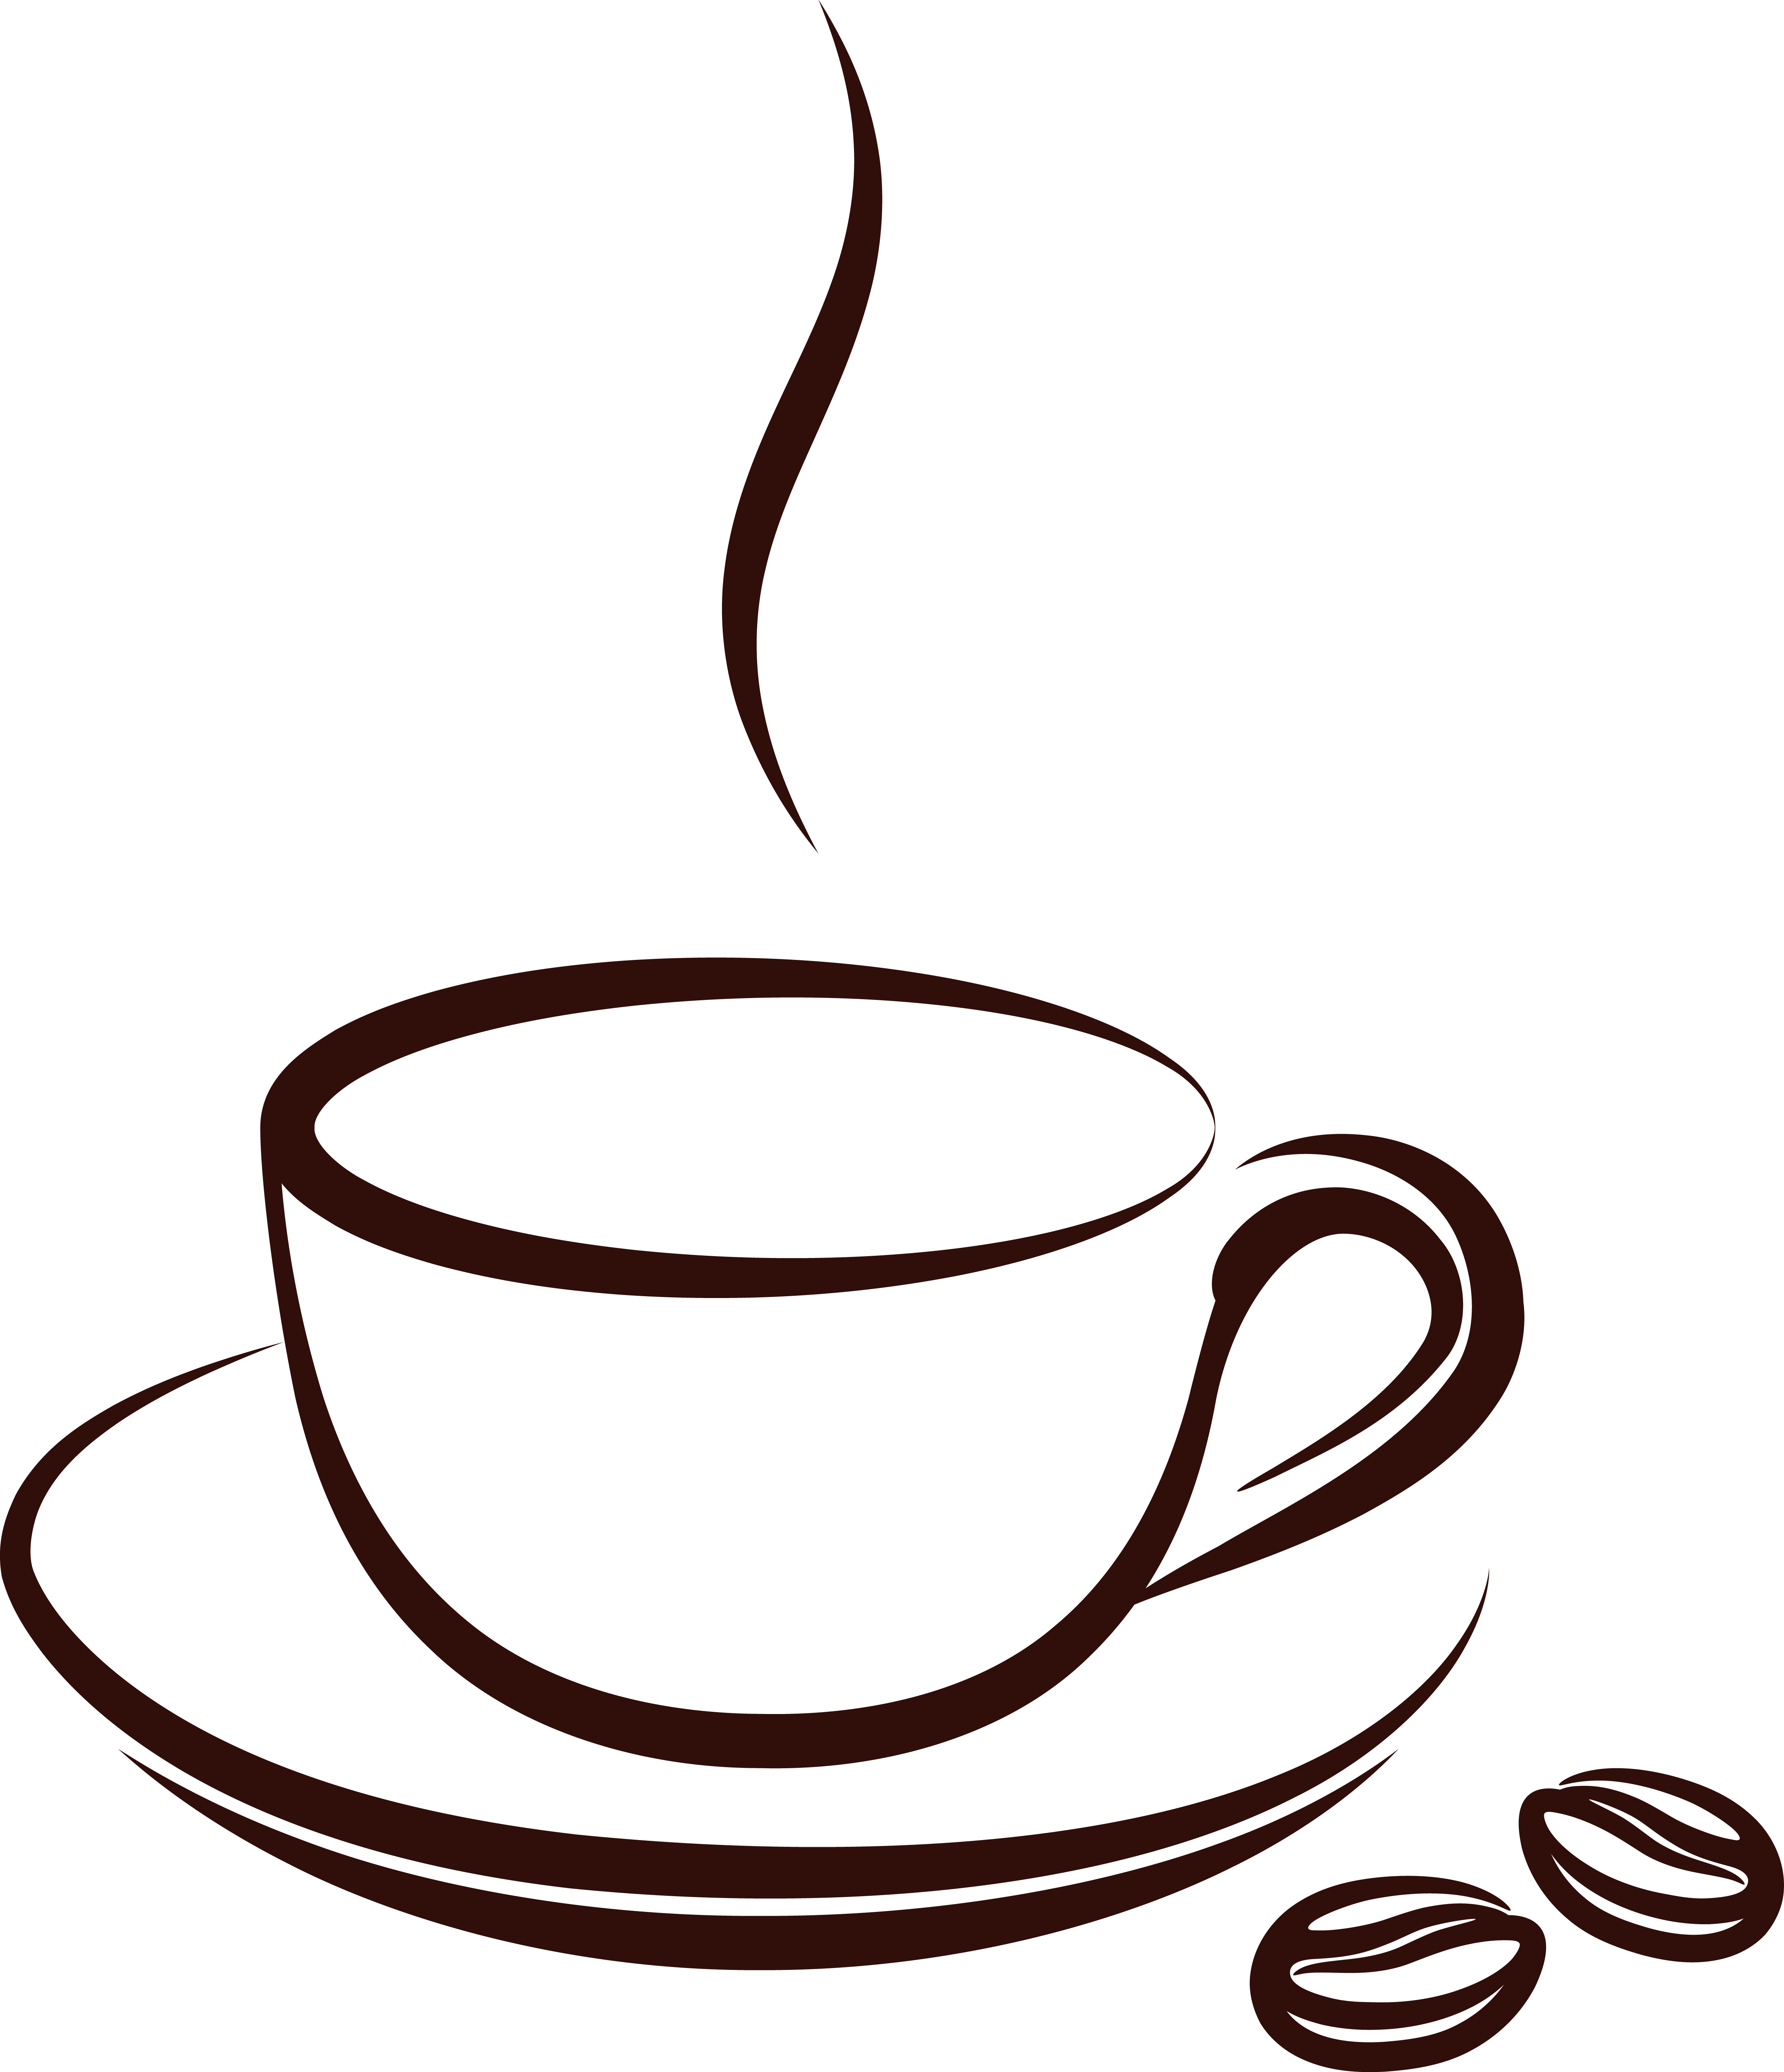 Coffee Cup Clipart & Coffee Cup Clip Art Images.